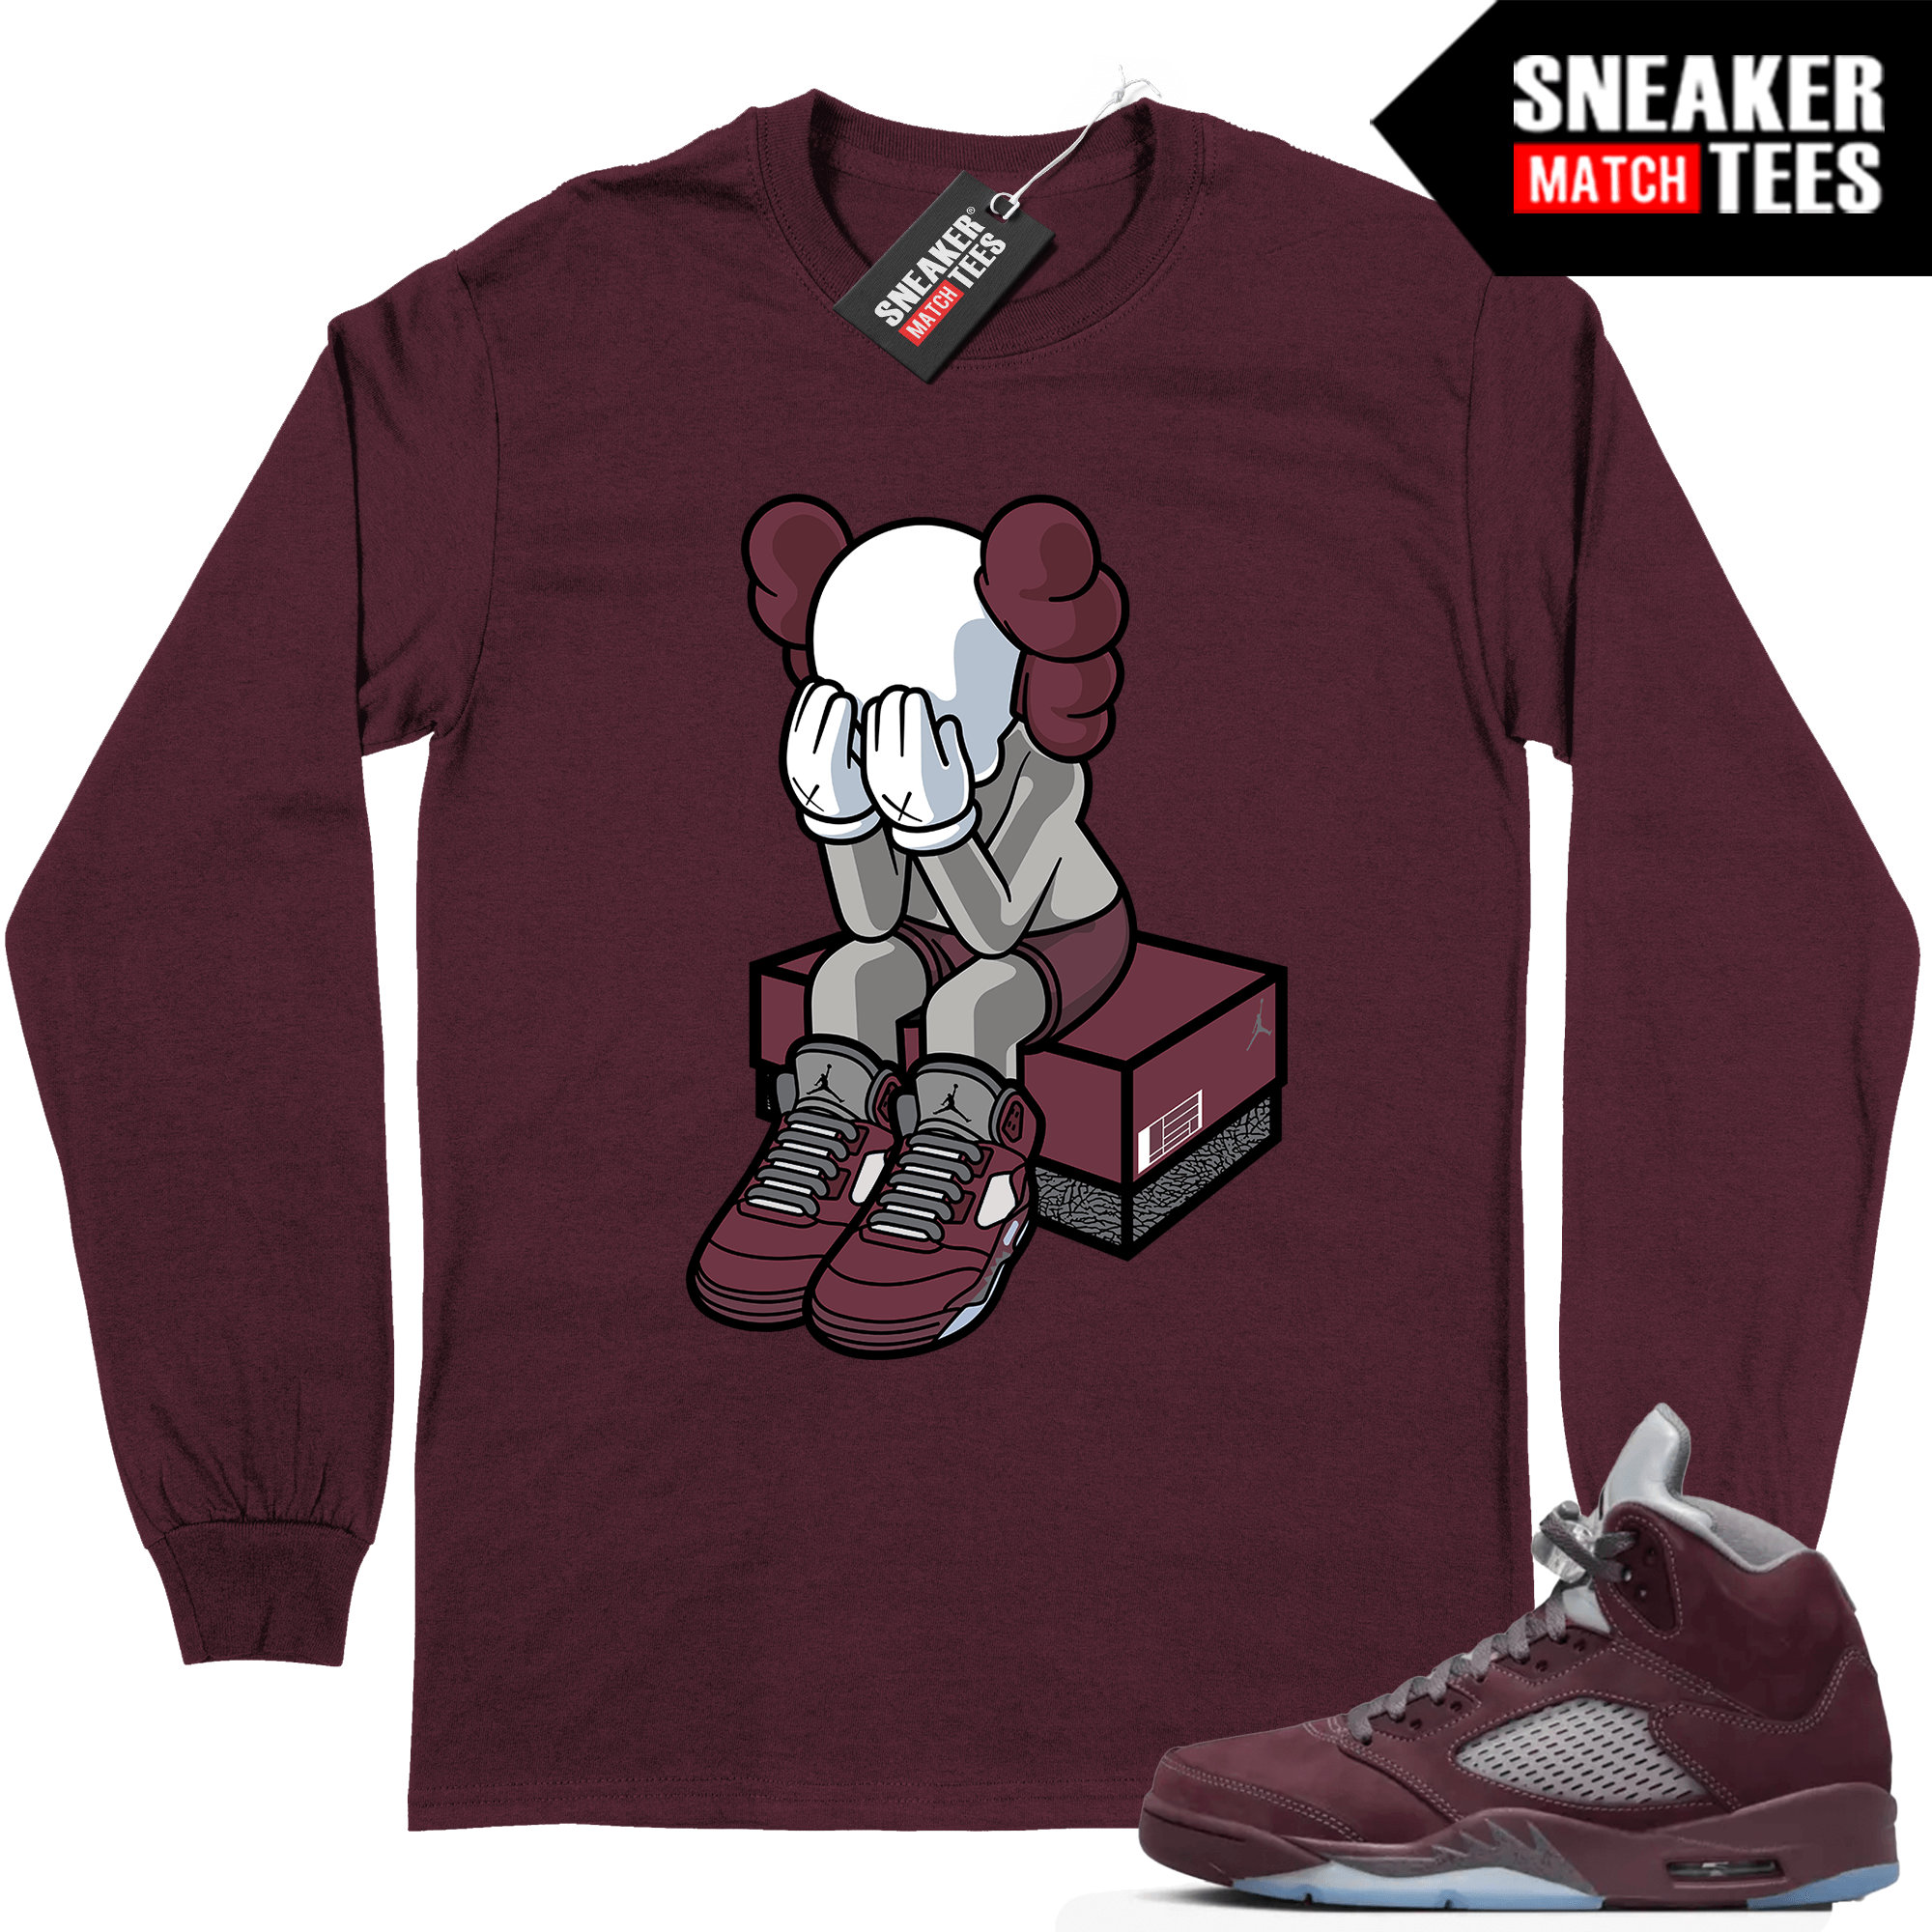  Graphic Tees Baby Angel Design Printed 5 Burgundy Sneaker  Matching T-Shirt (White/S): Clothing, Shoes & Jewelry